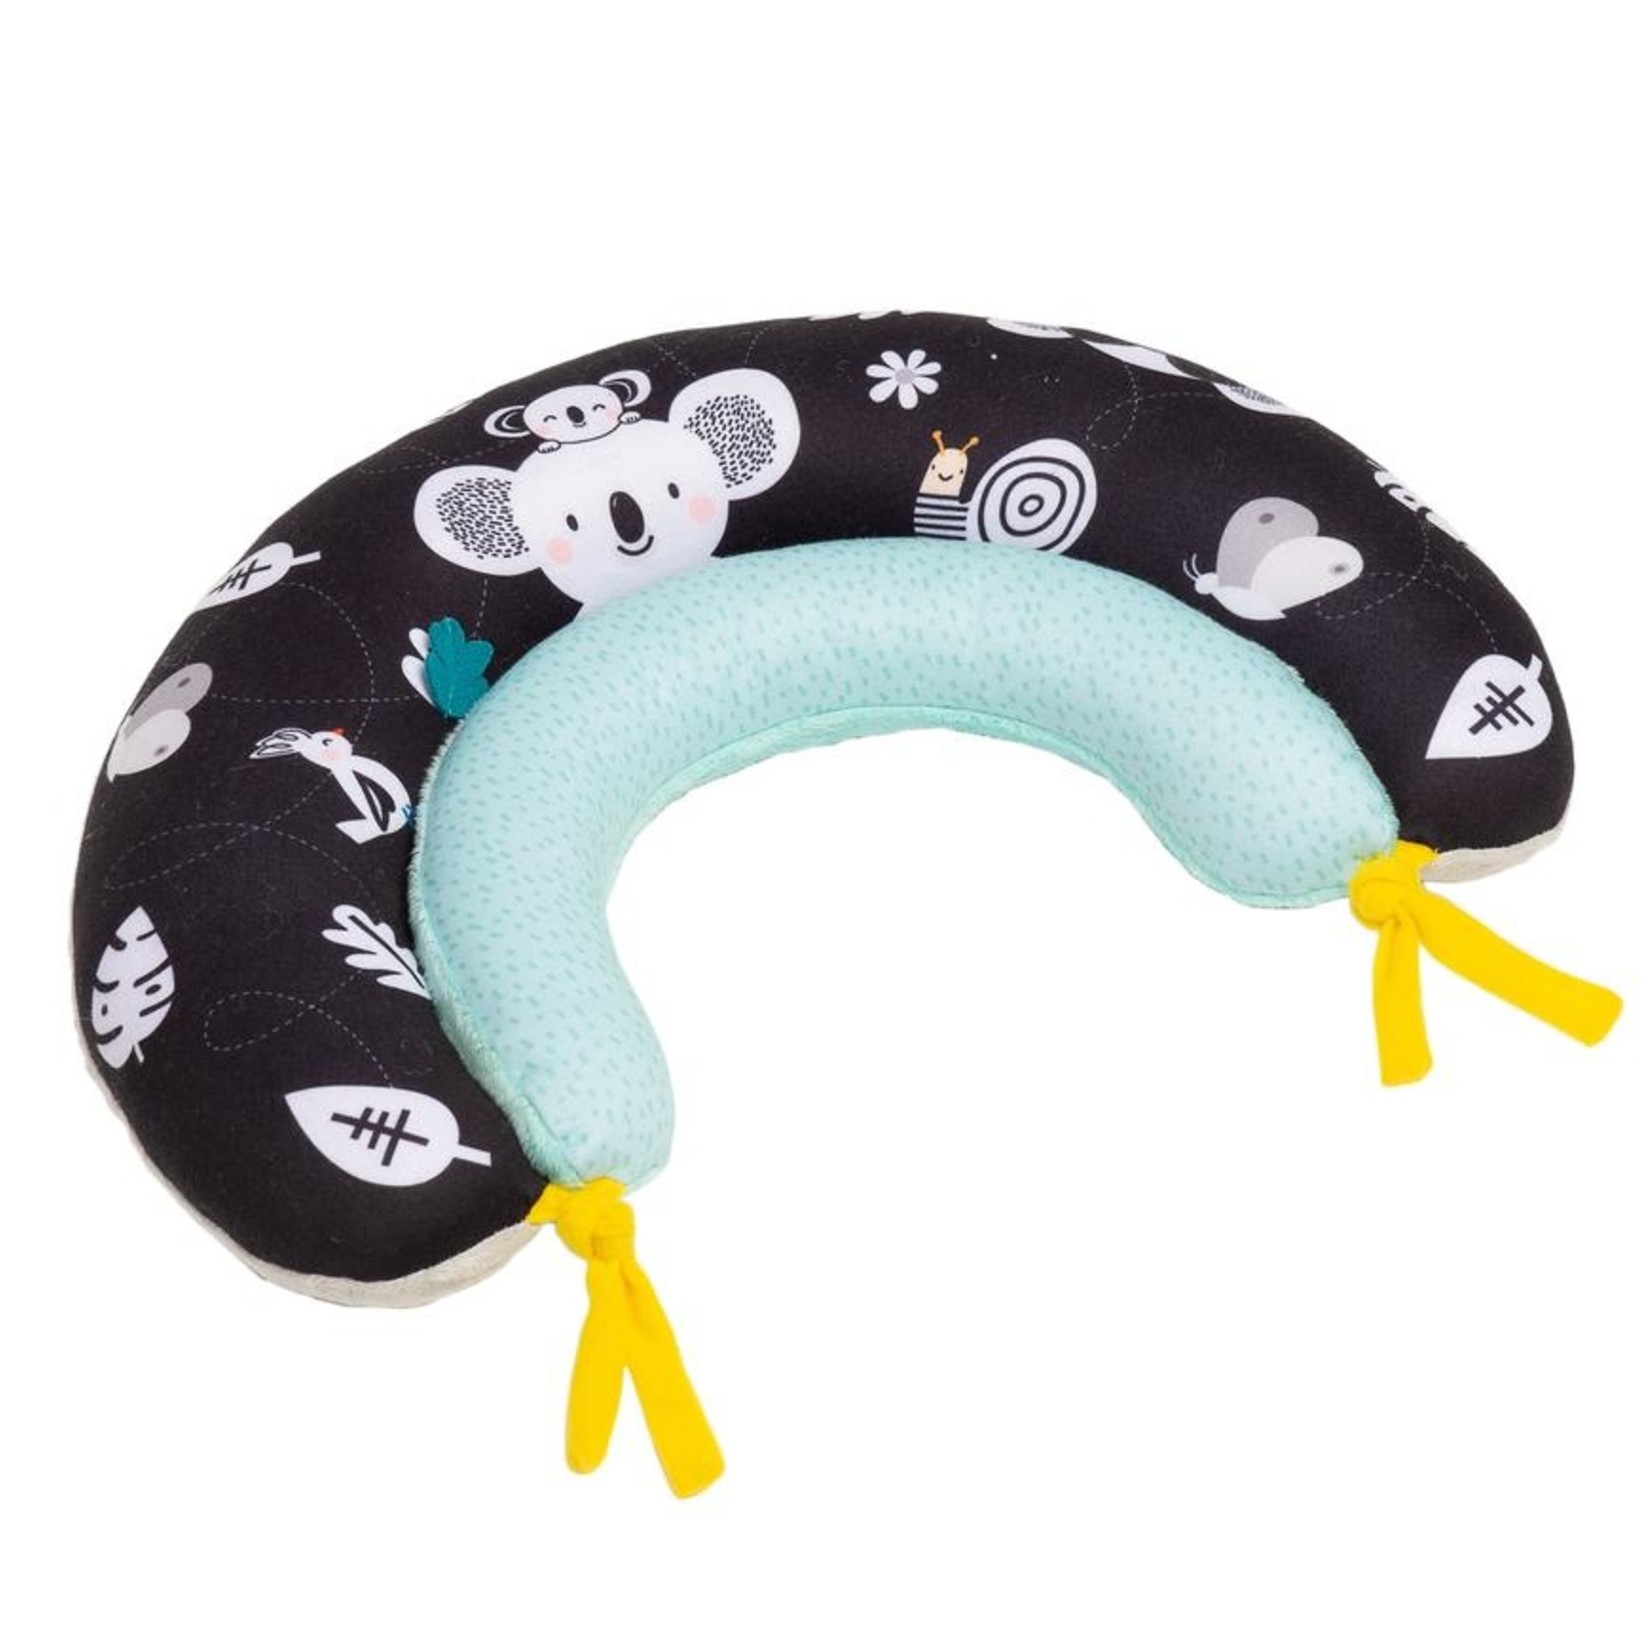 Taf Toys 2 in 1 Tummy Time Pillow 0m+